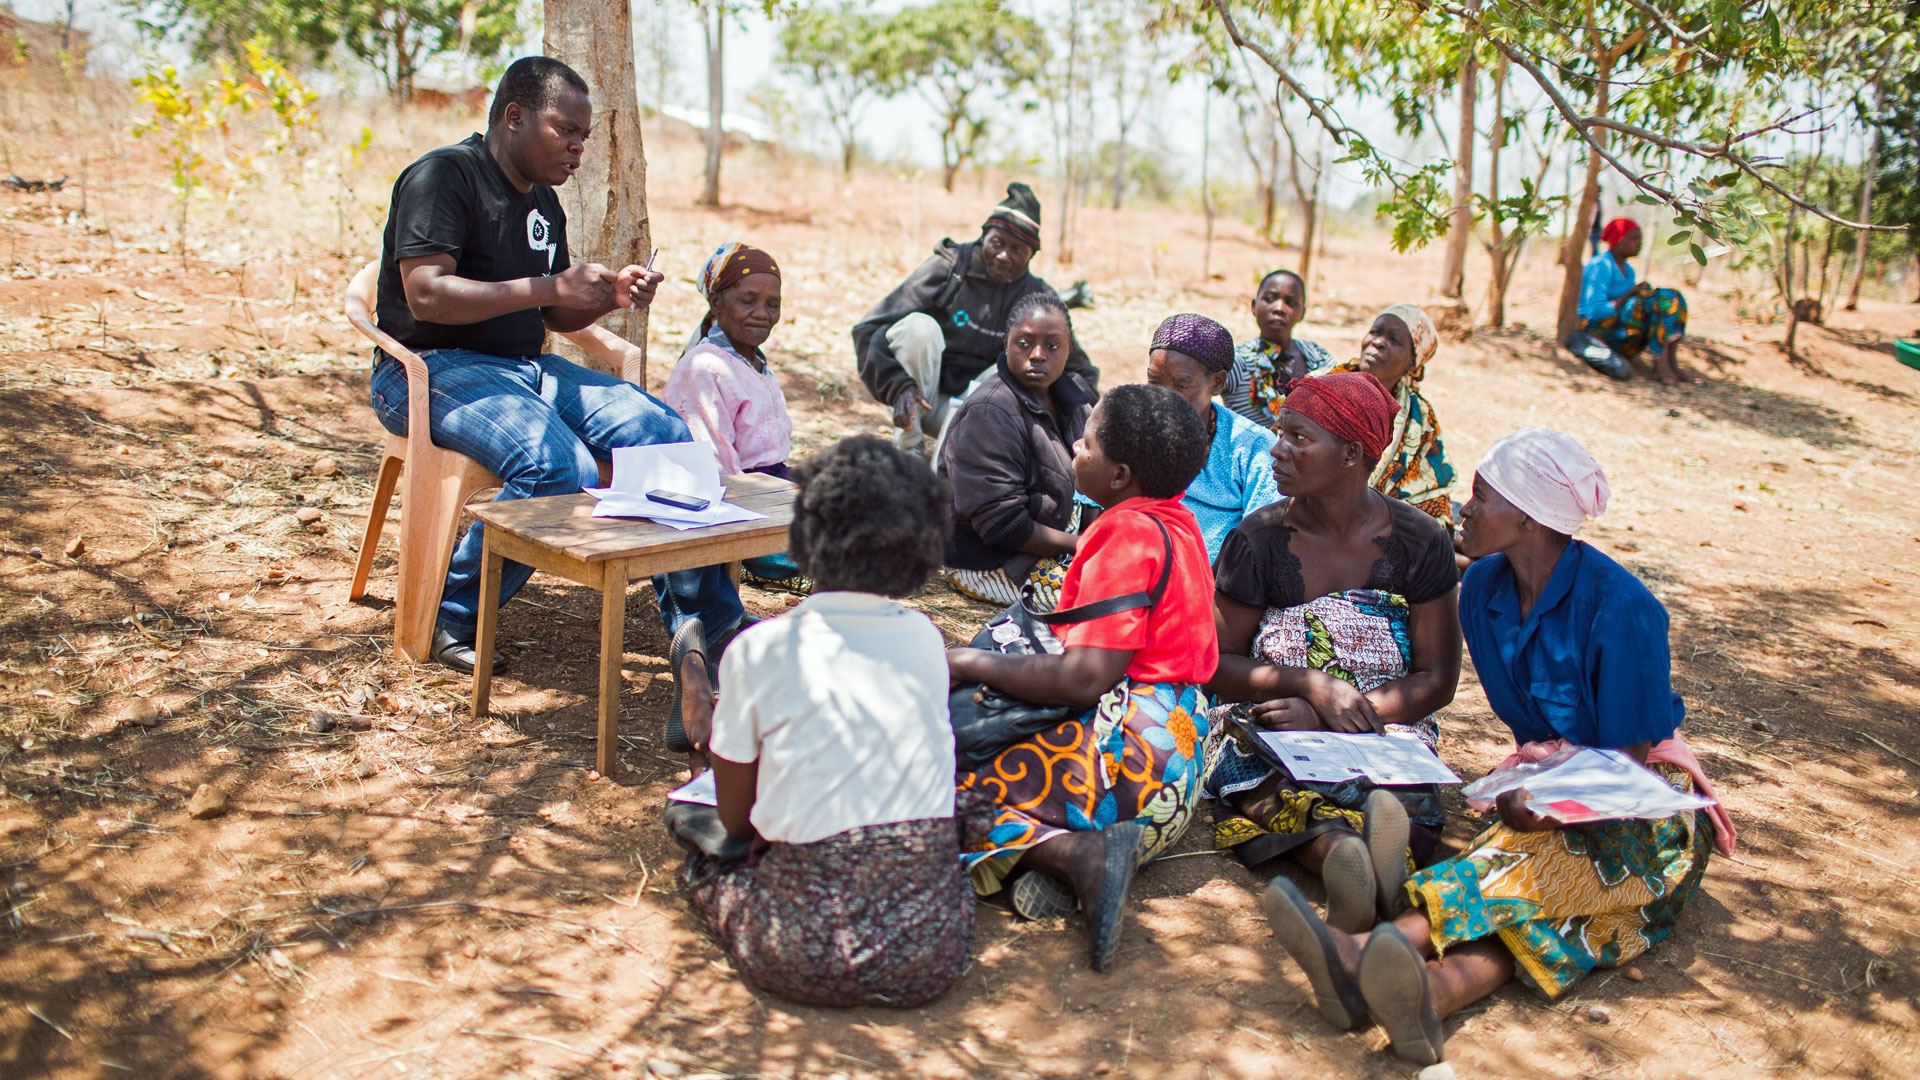 In the south of Malawi, small sums are paid out to extremely poor people as part of a social cash transfer programme.